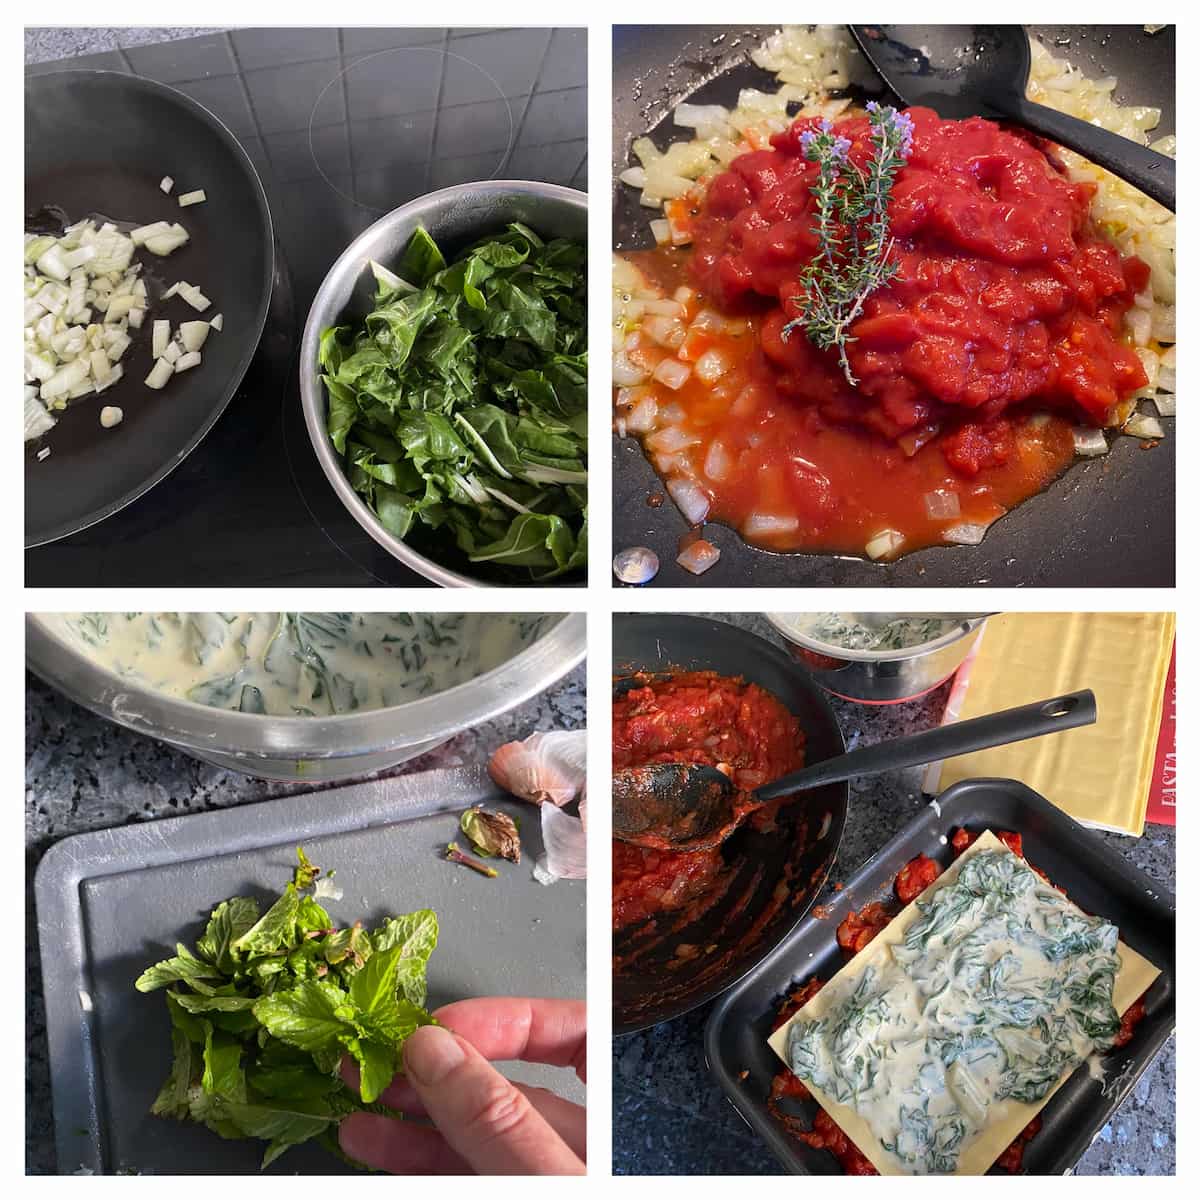 4 easy steps to make the lasagna layered fillings